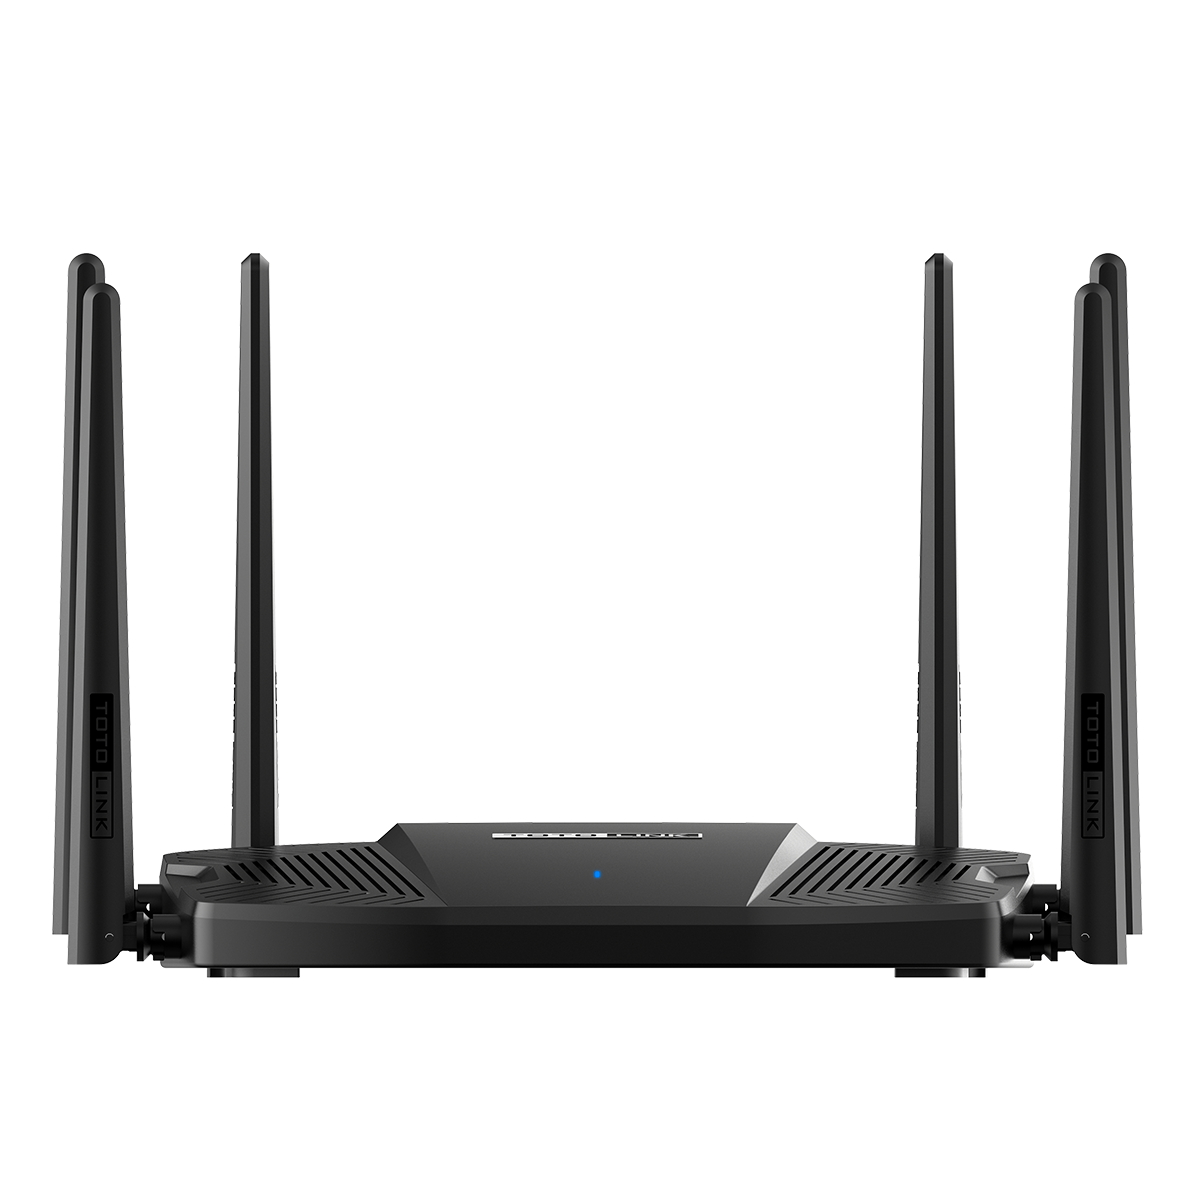 TOTOLINK (A6000R) AC2100 Wireless Dual Band Gigabit Router